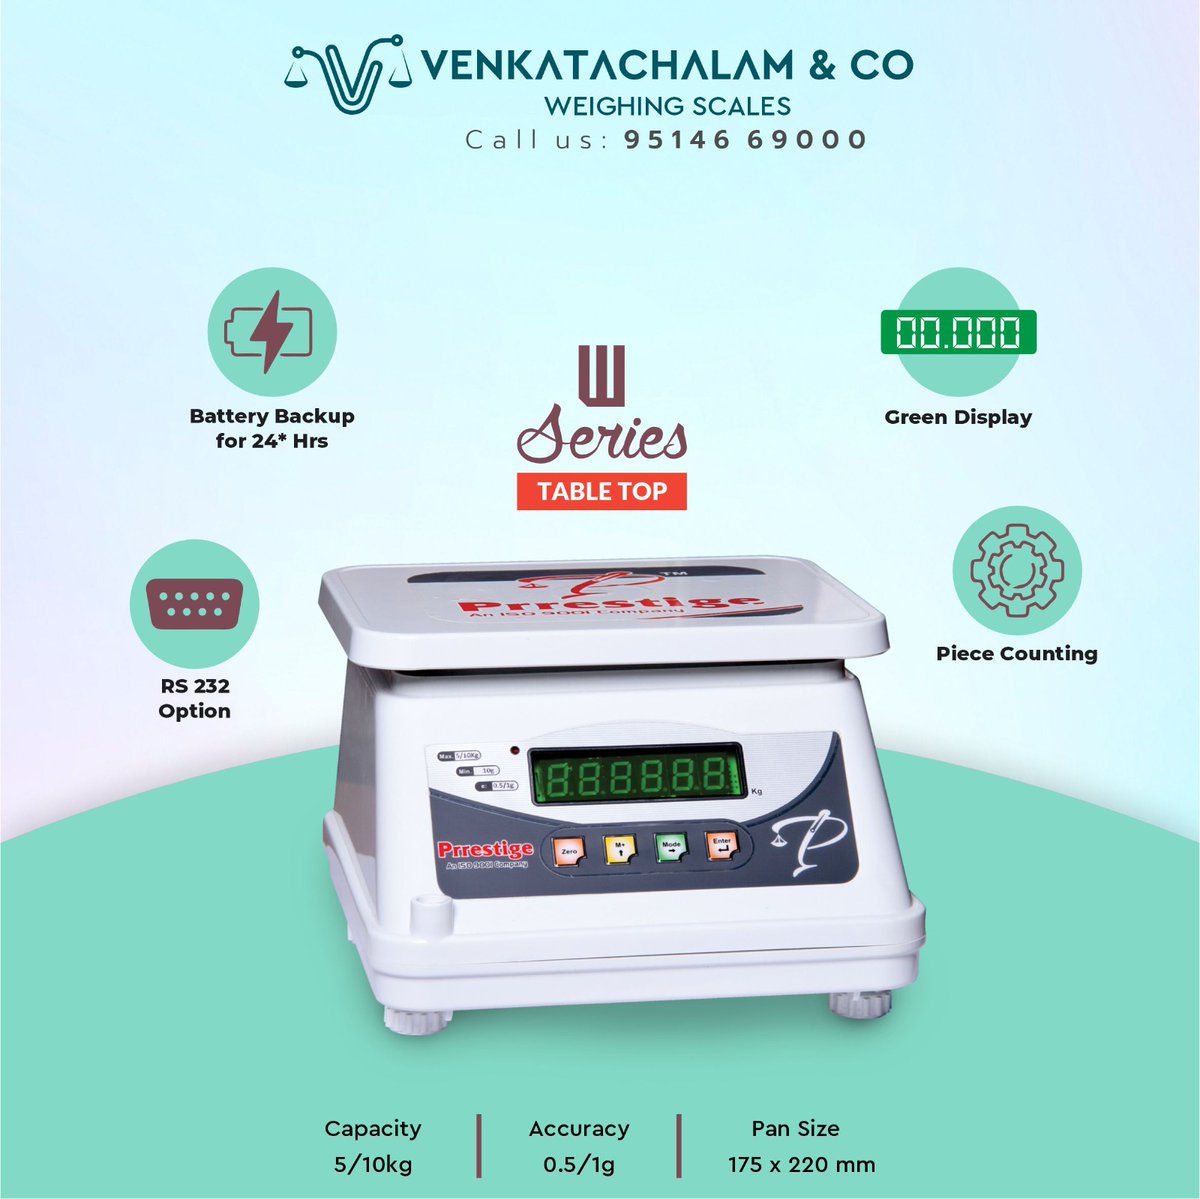 Prrestige's Table Top Scale - W series

Available in 10kg and 20kg weight capacities. Perfect for #sweetstall #grocerystore #fruitshop #Retailer #streetvendor
.
.
#venkatachalamandco #prrestigescale #Digitalscales #smallbusiness #weighingscale #Weighingmachine #compact #precise